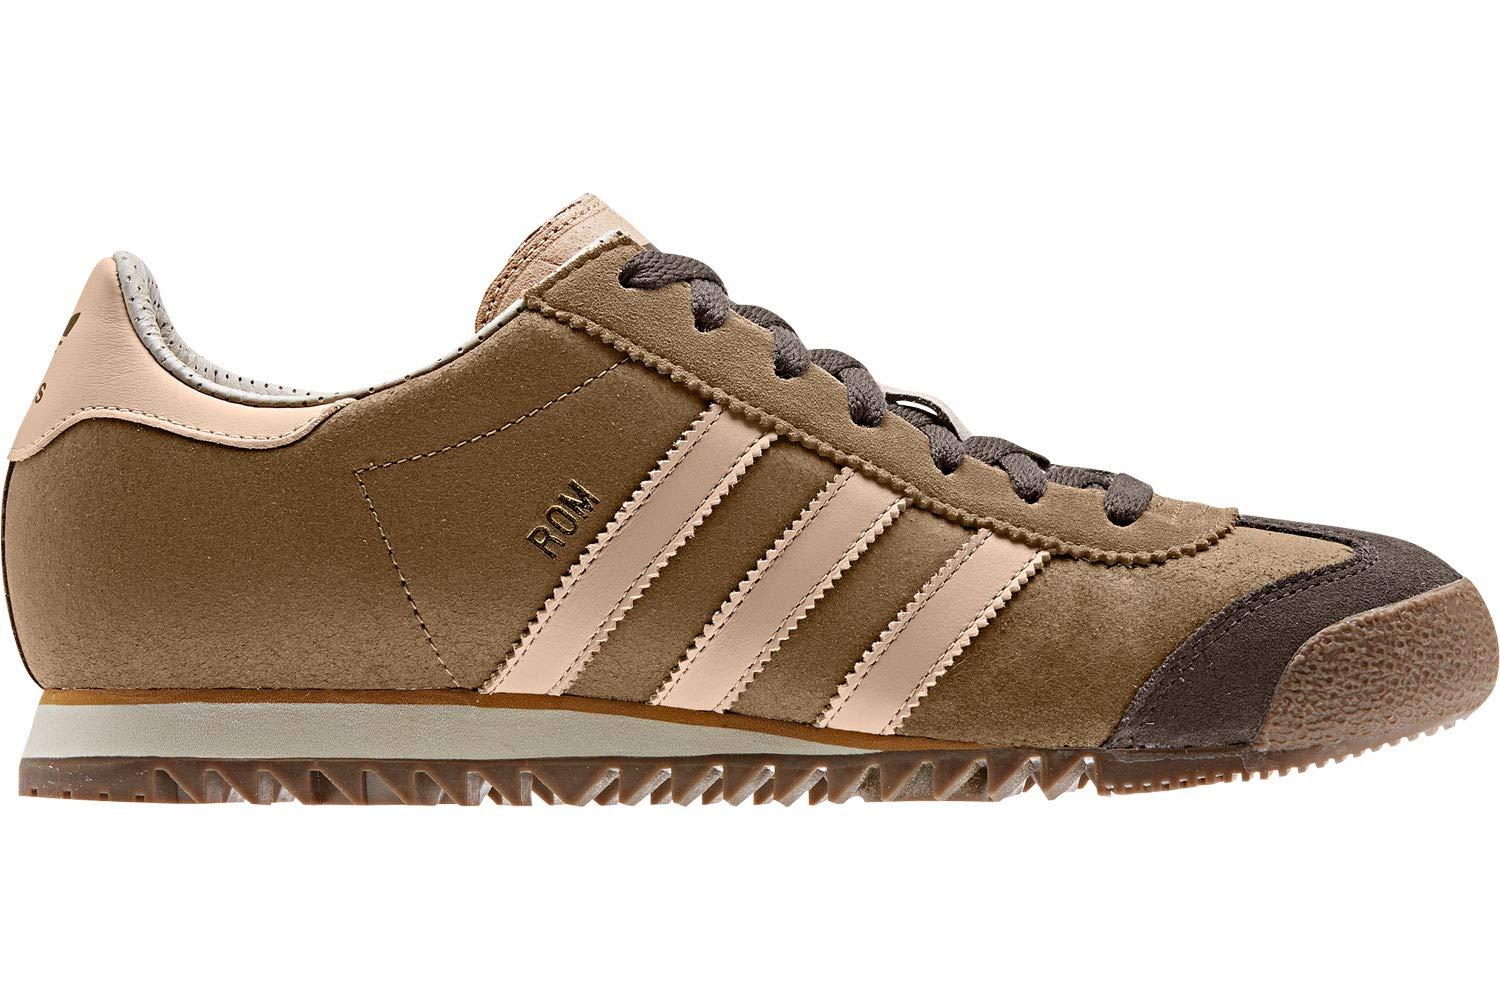 adidas Rom Trainers Raw Deserts/st Pale/brown 11 Uk for Men | Lyst UK